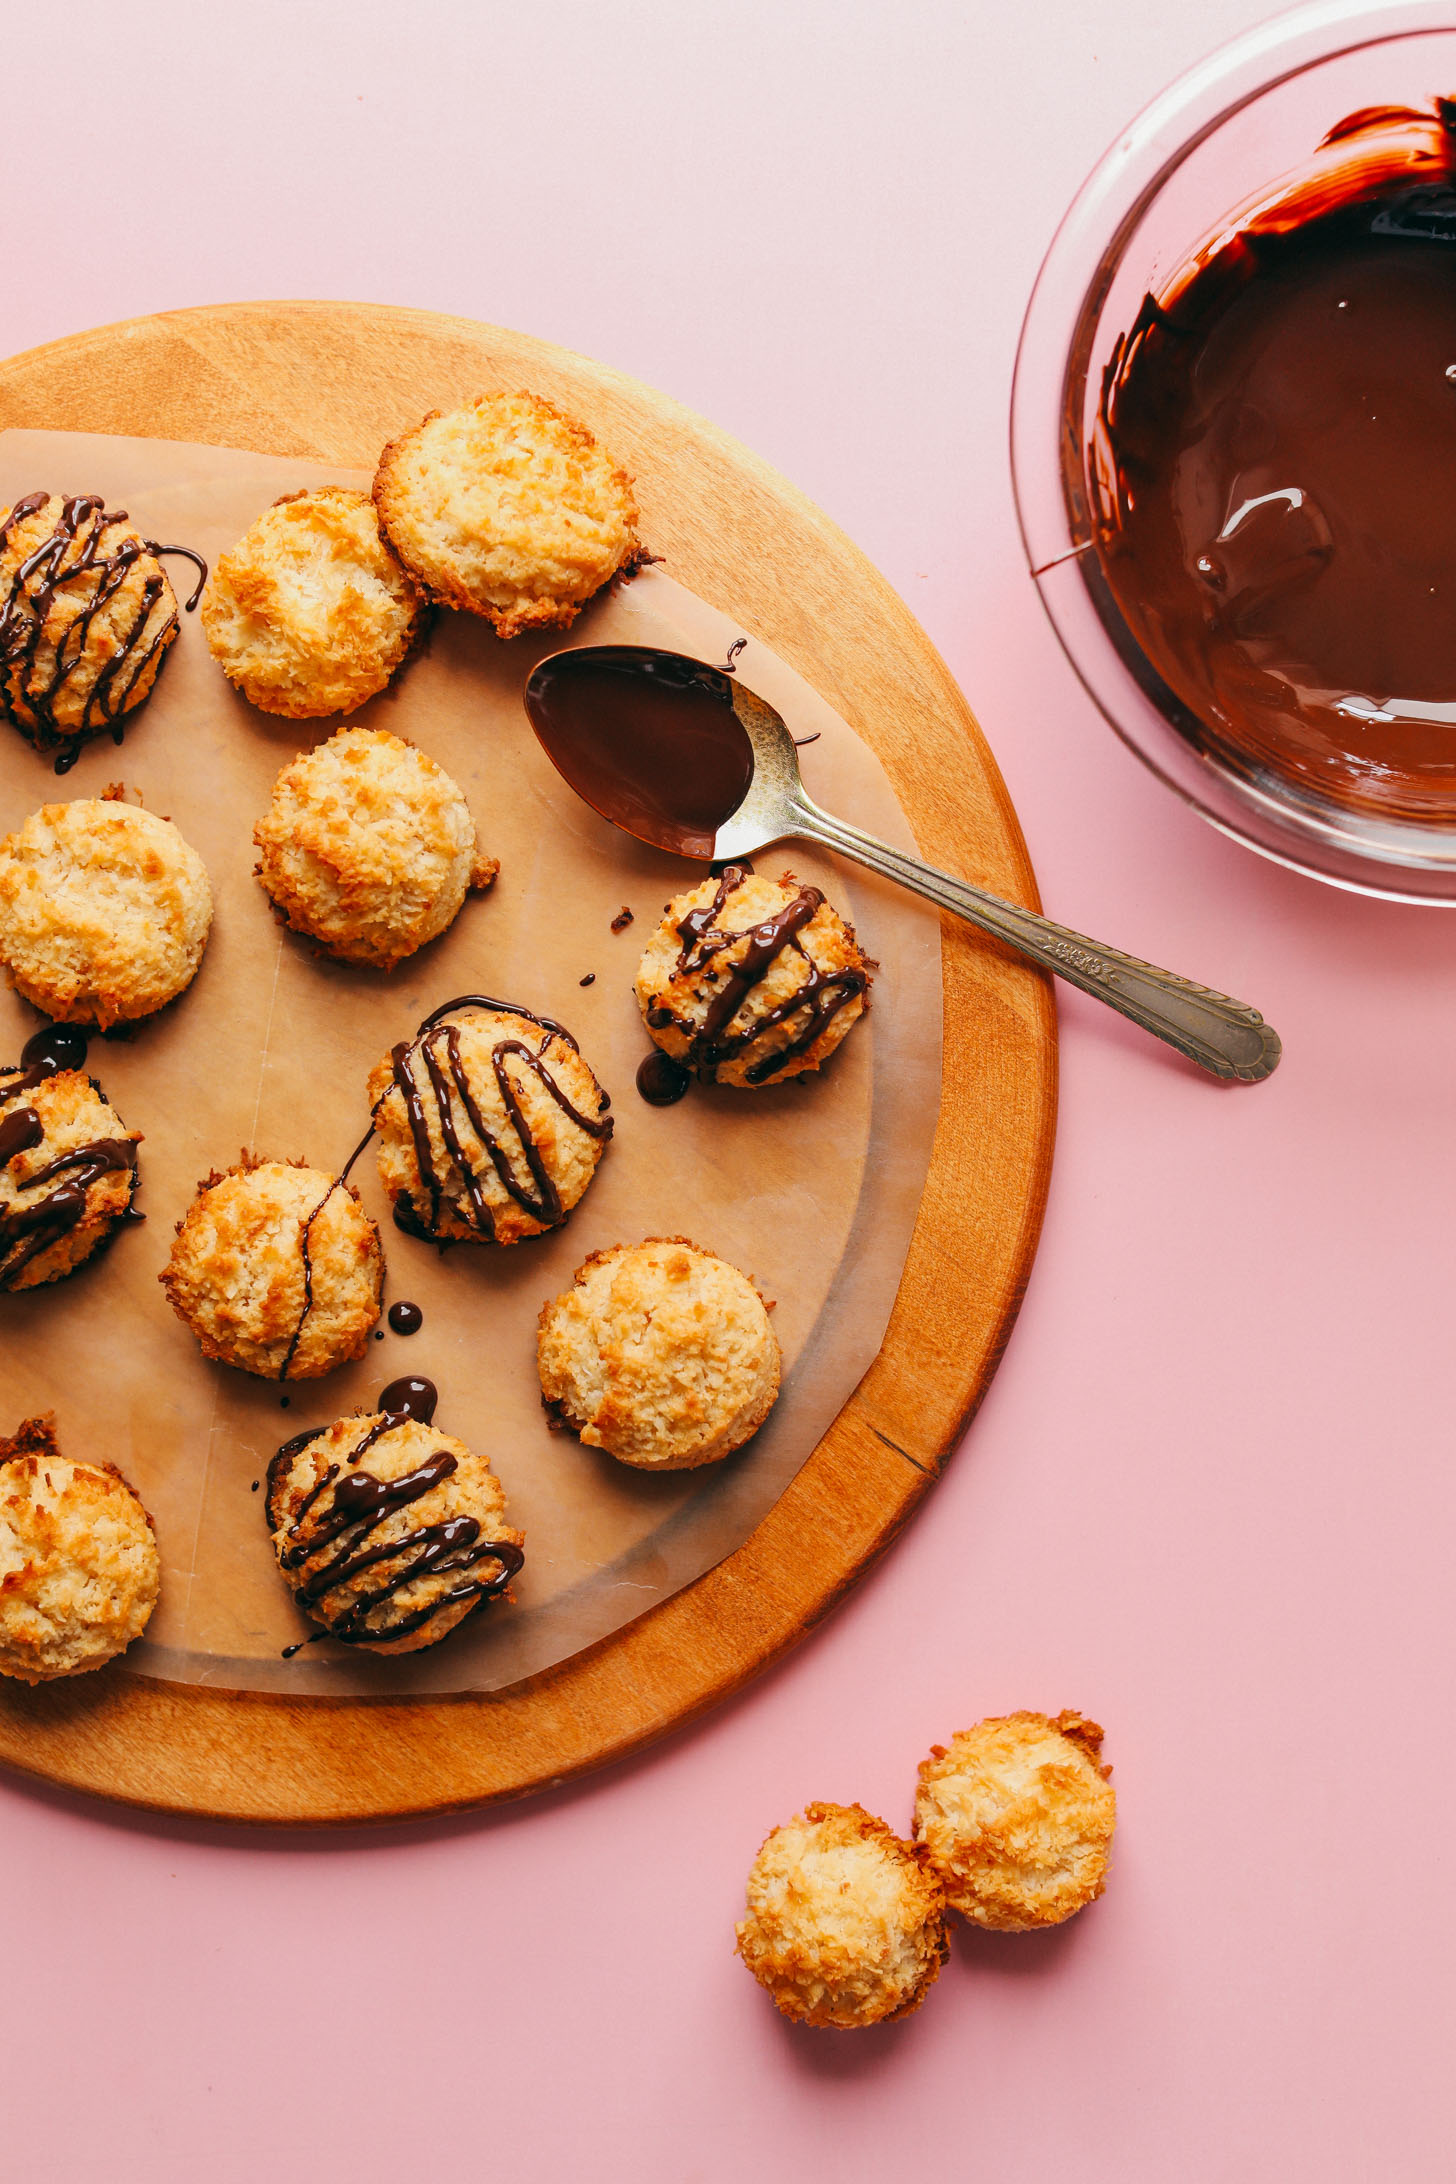 Wooden cutting board with Crispy Vegan Macaroons, some with a chocolate drizzle